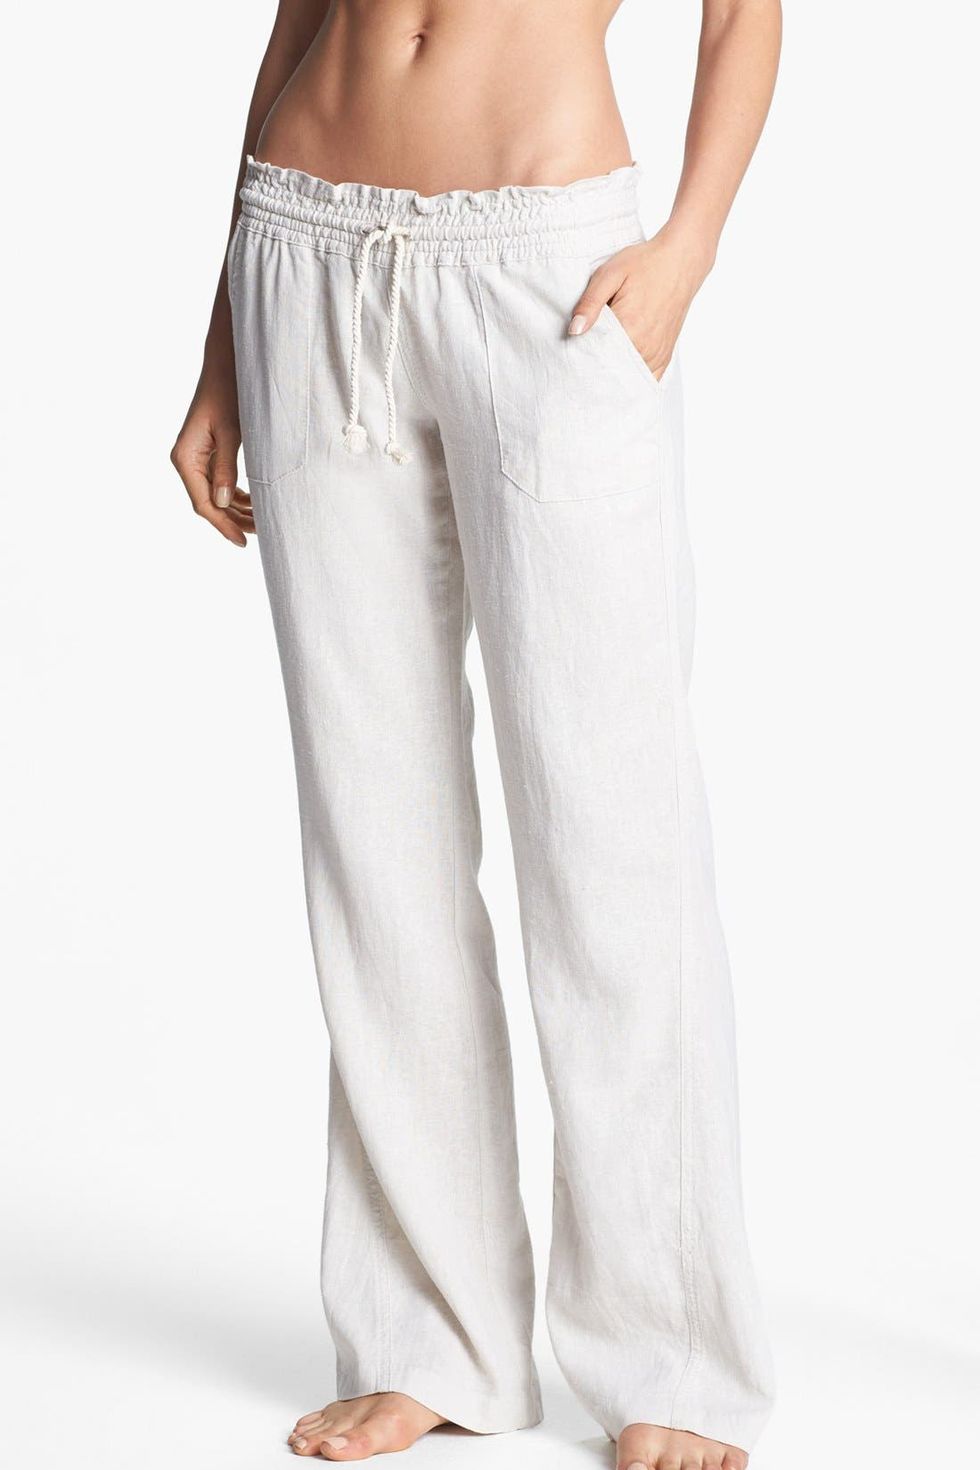 20 Best Beach Pants to Wear for Summer 2023